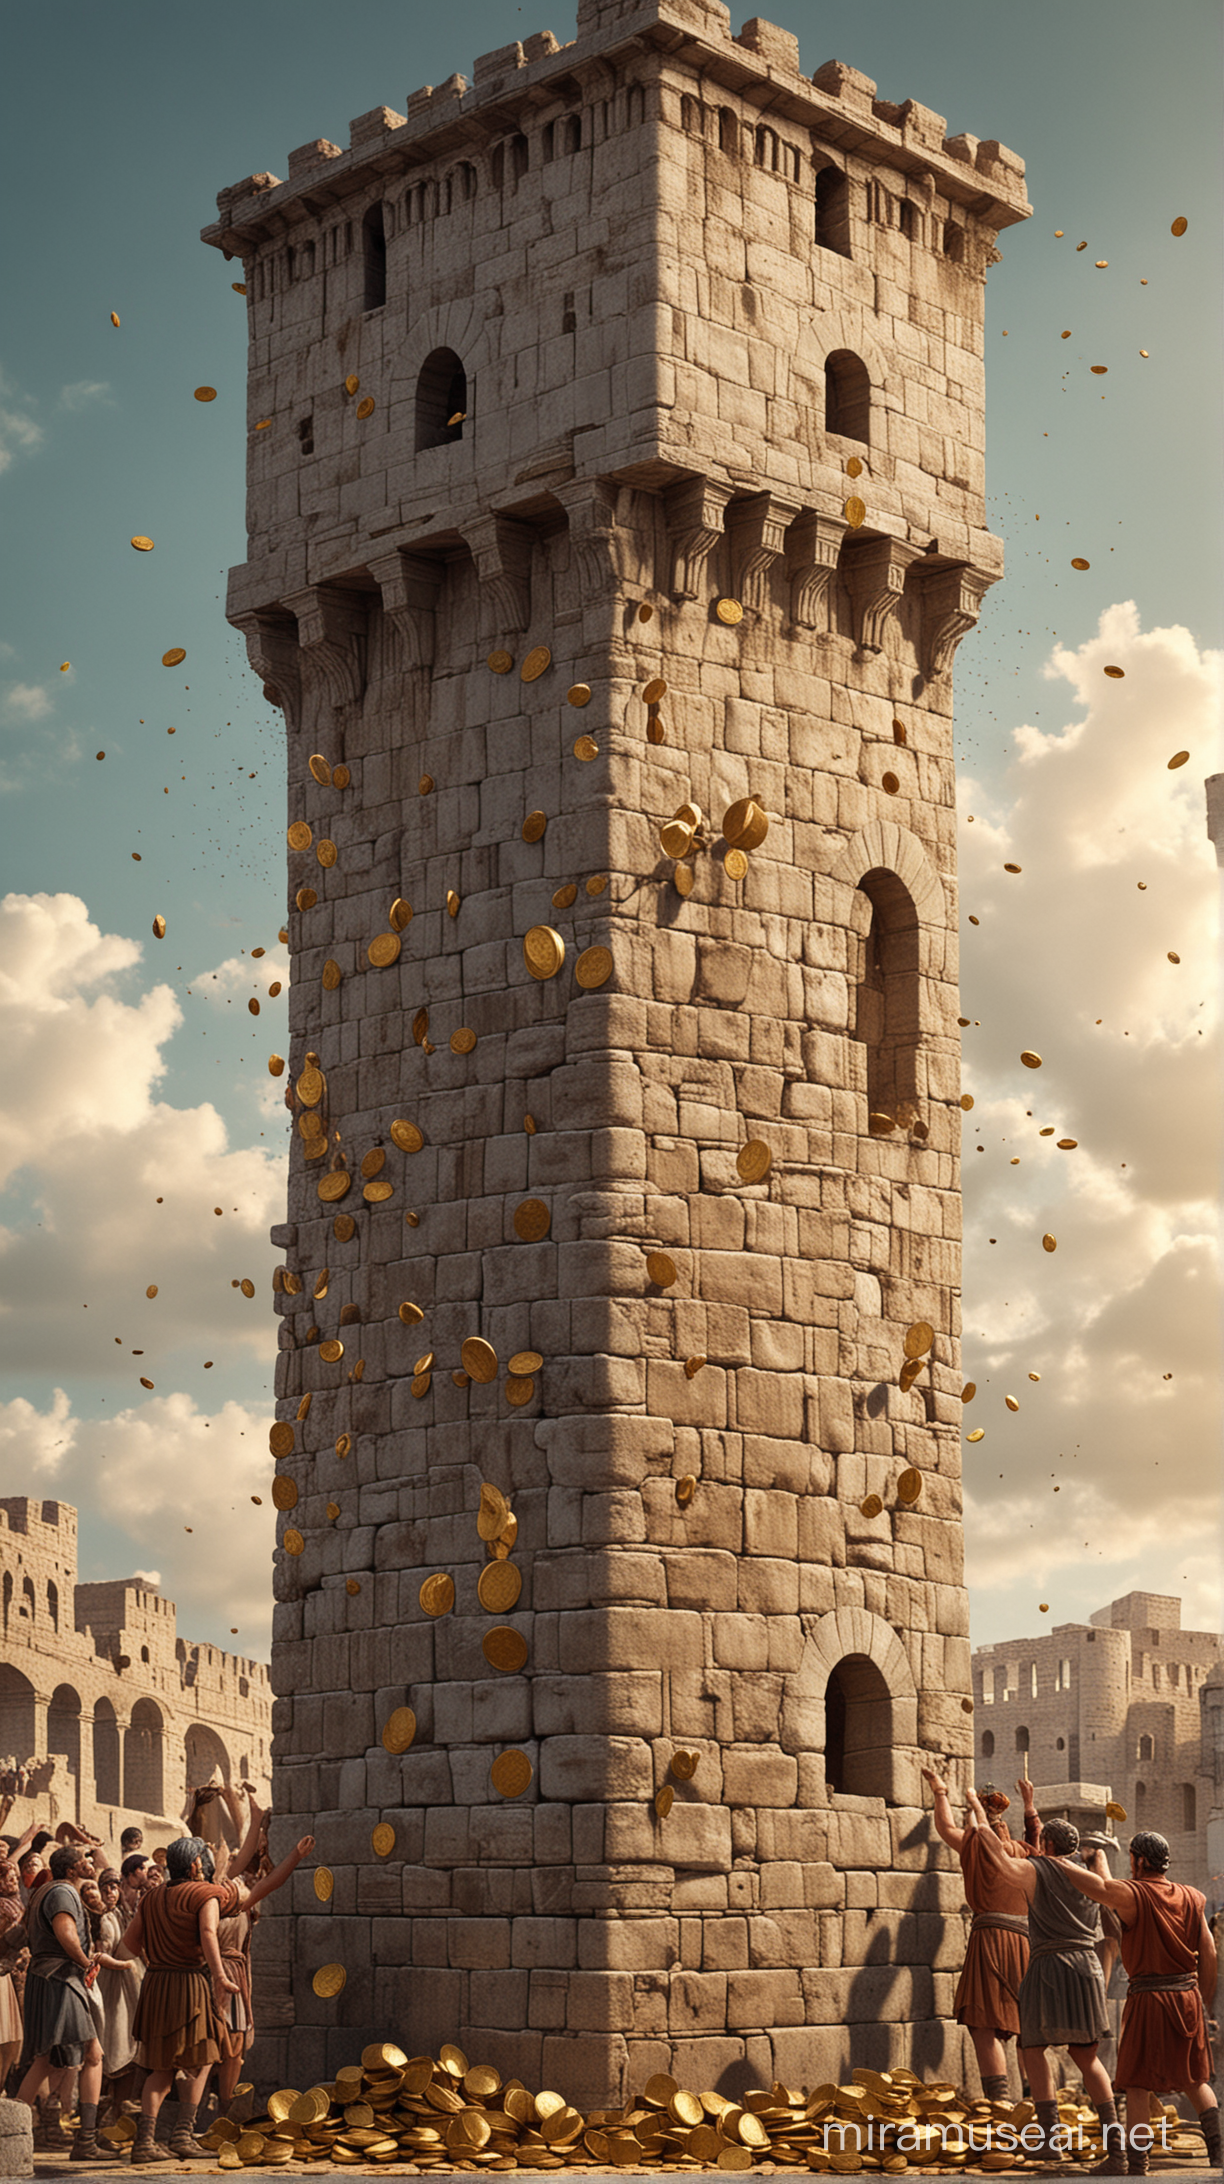 Image of Elagabalus throwing gold coins from a tower, with people below scrambling to collect them. hyper realistic